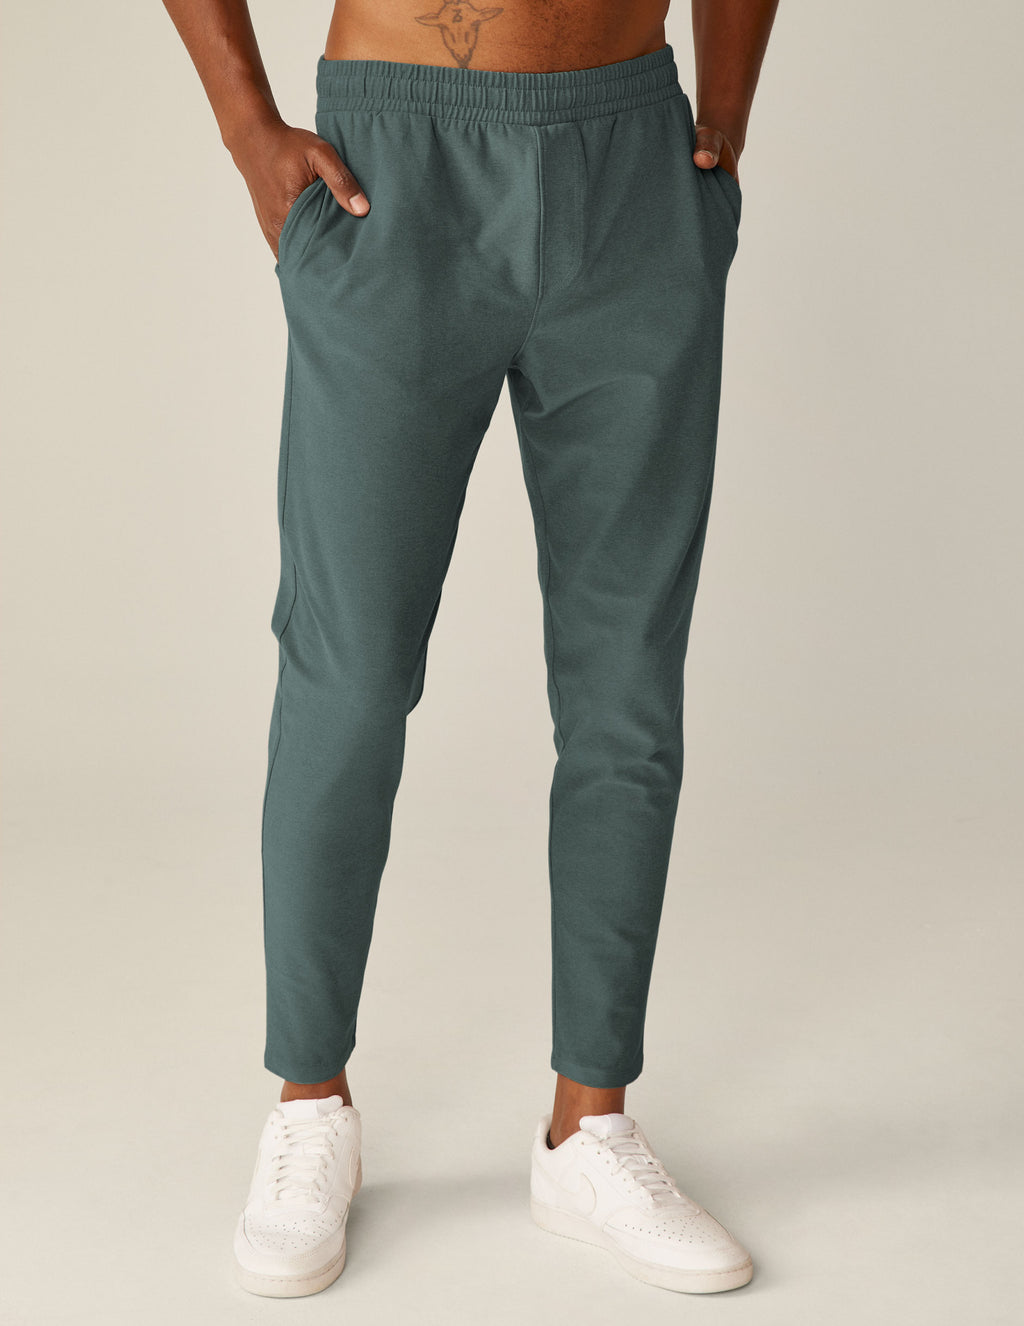 LAPASA Men's Sweatpants, Active Joggers with Pockets for Running